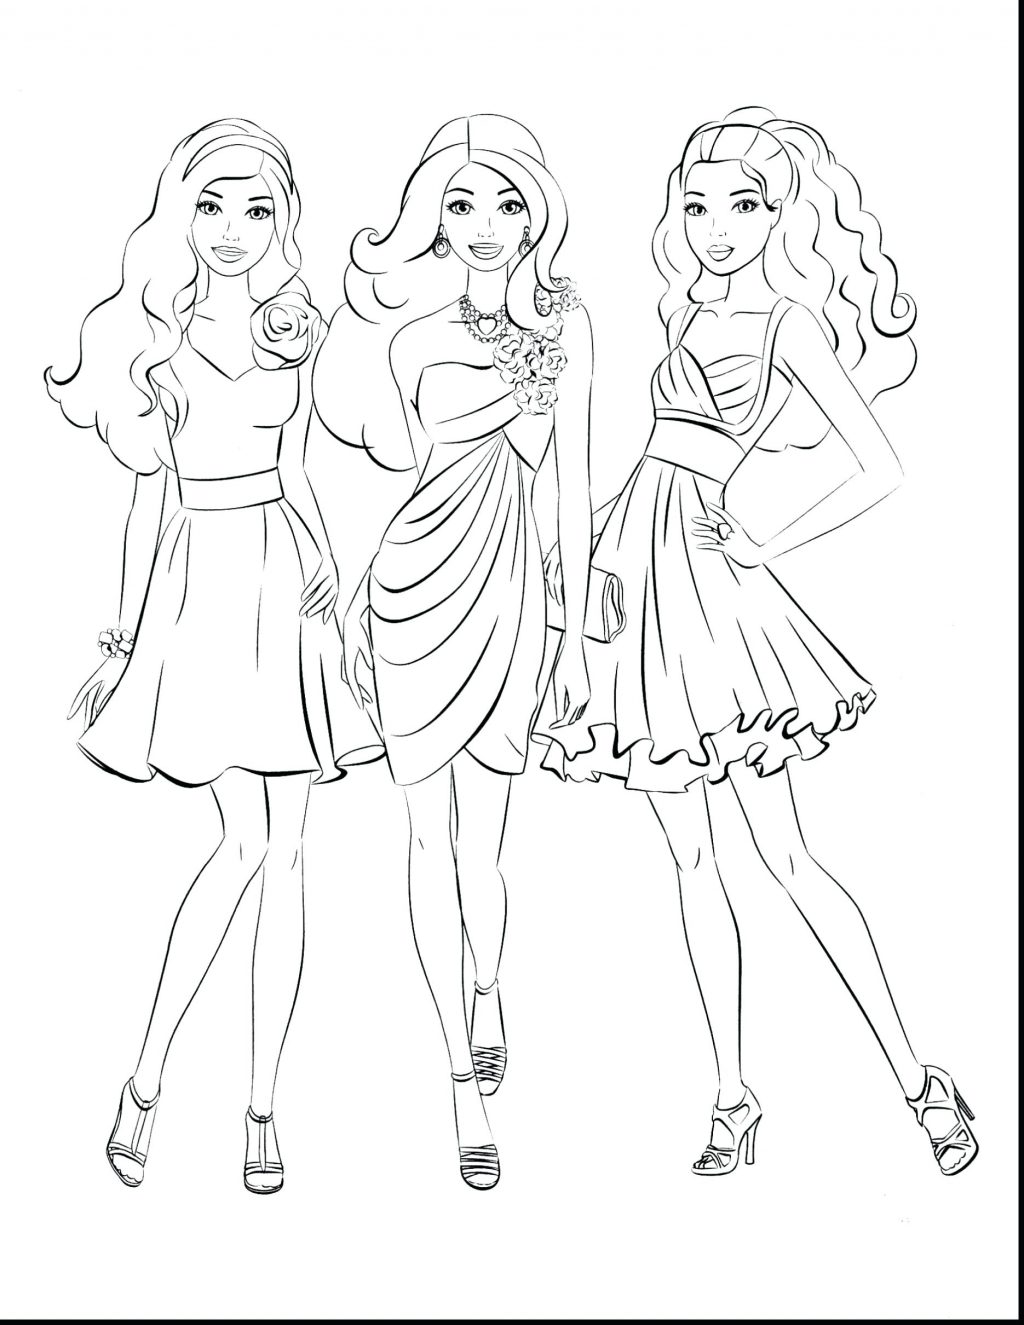 3 sporty best friend coloring pages